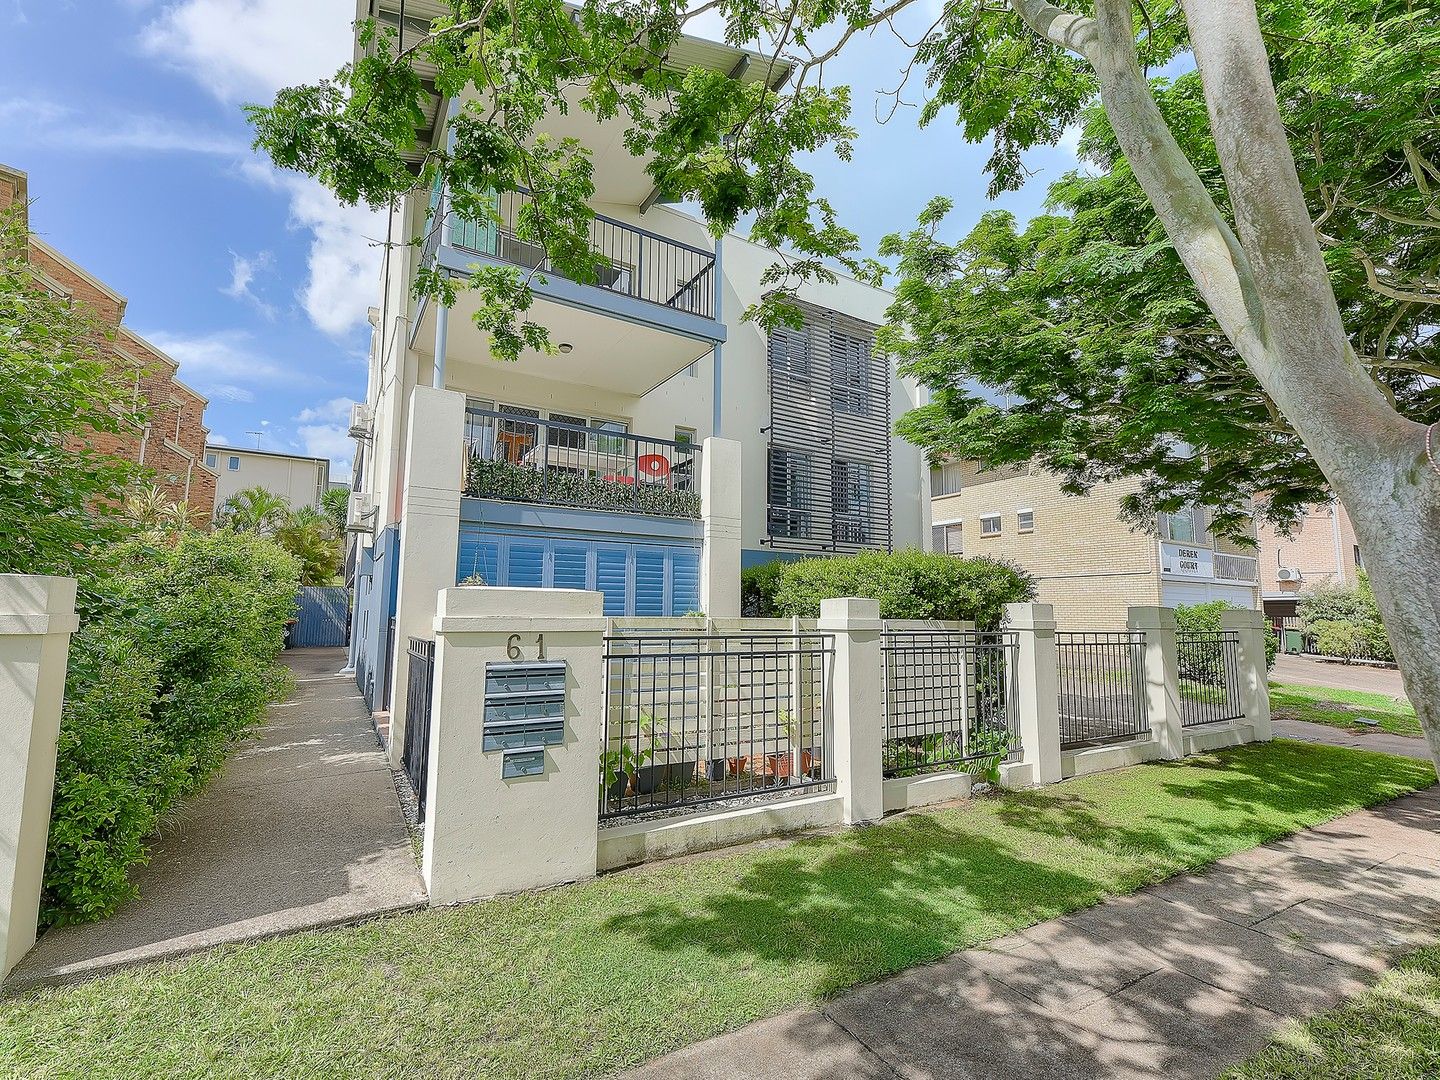 2/61 Maryvale Street, Toowong QLD 4066, Image 0